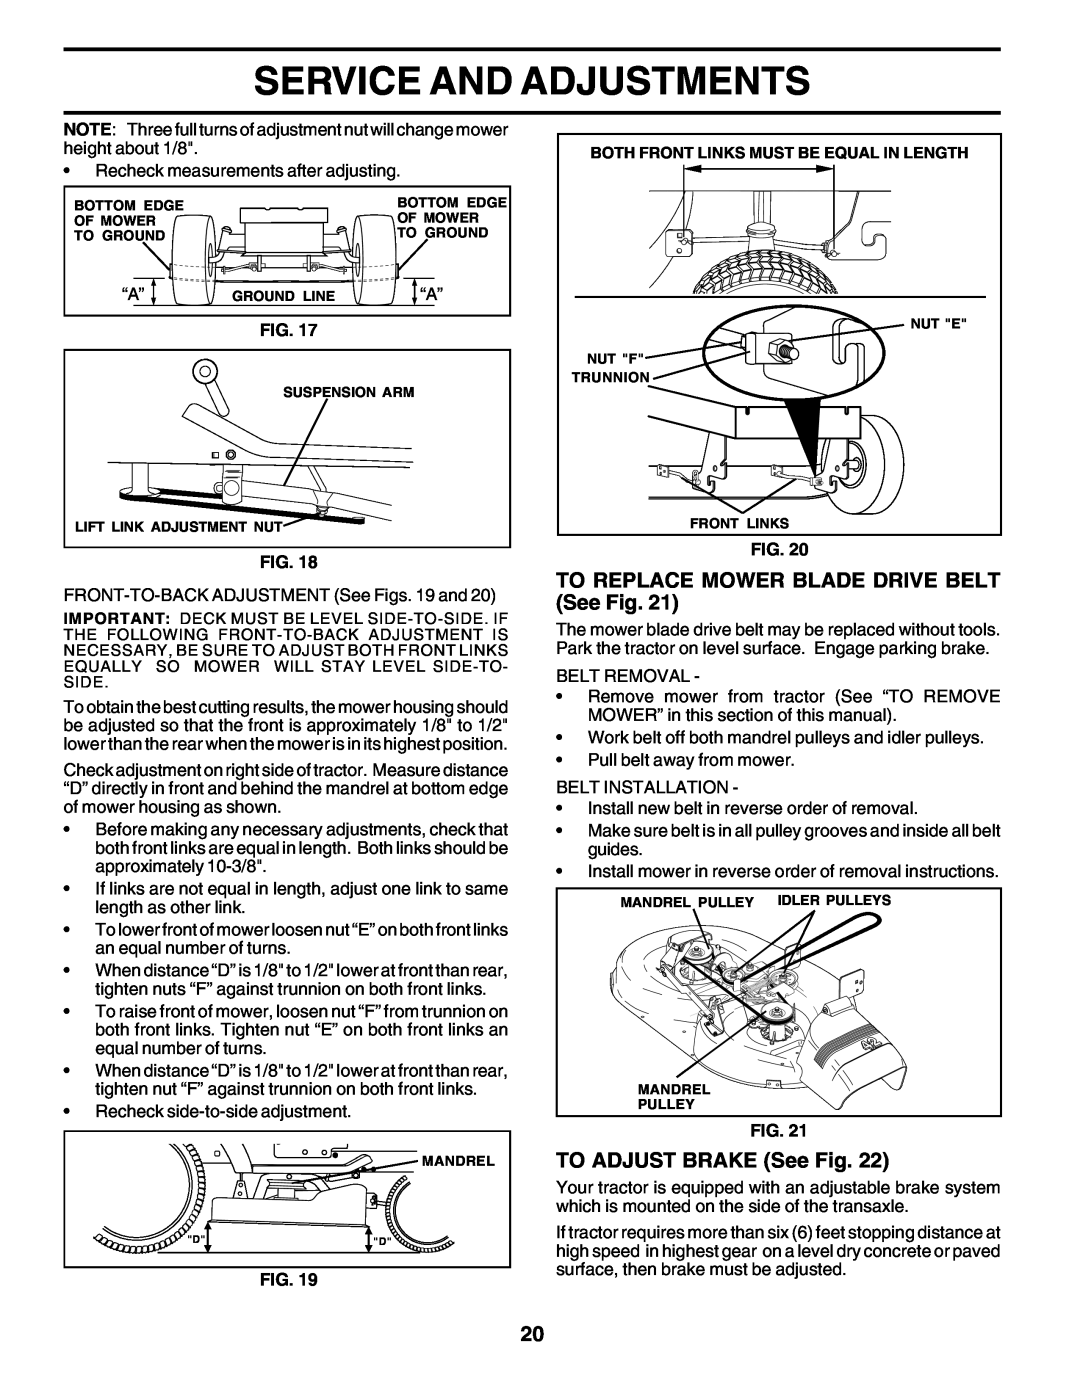 Weed Eater S165H42D Service And Adjustments, TO REPLACE MOWER BLADE DRIVE BELT See Fig, TO ADJUST BRAKE See Fig 